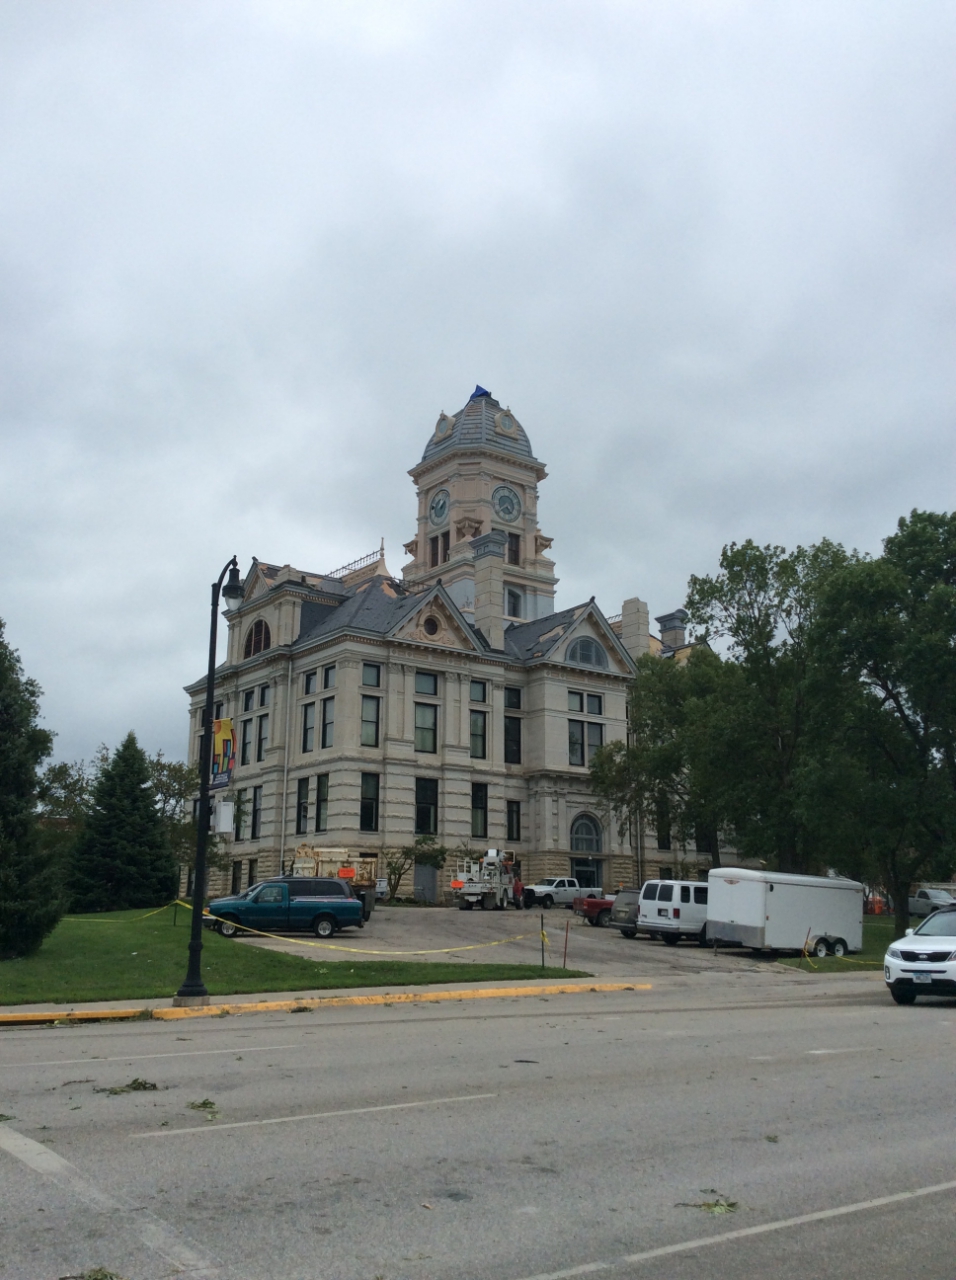 Marshall County Courthouse in Marshalltown missing its clock tower